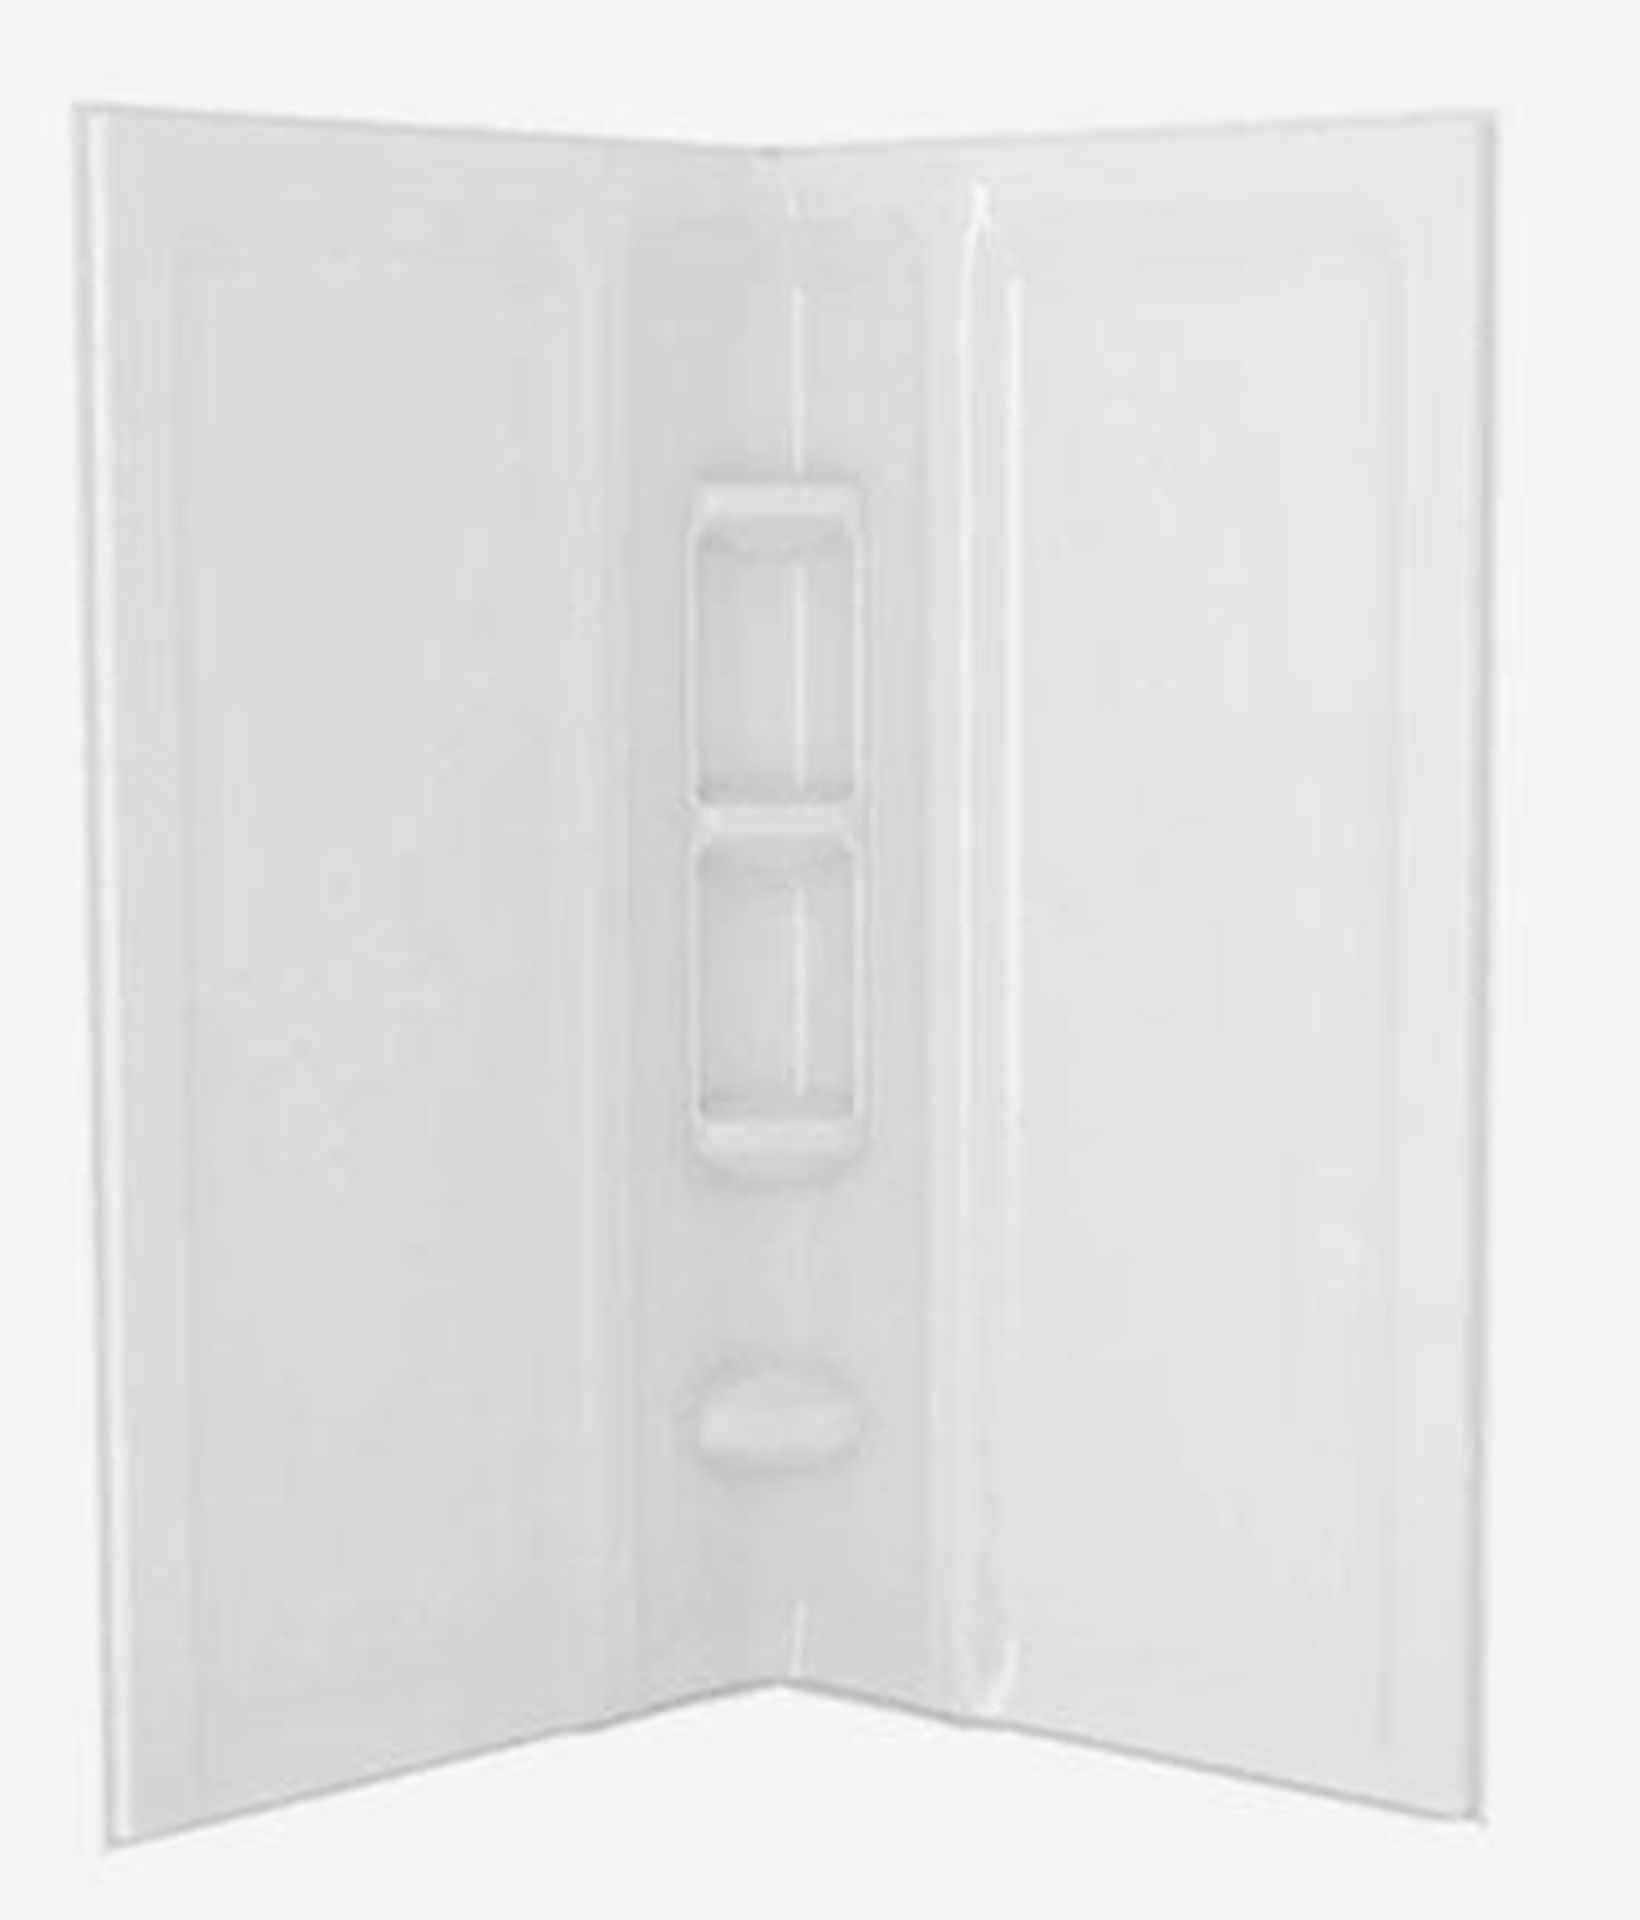 (3) American Standard "Axis" 42" x 73.5" 3 Piece Shower Wall Sets, Model 4242CW.020, Polystyrene wit